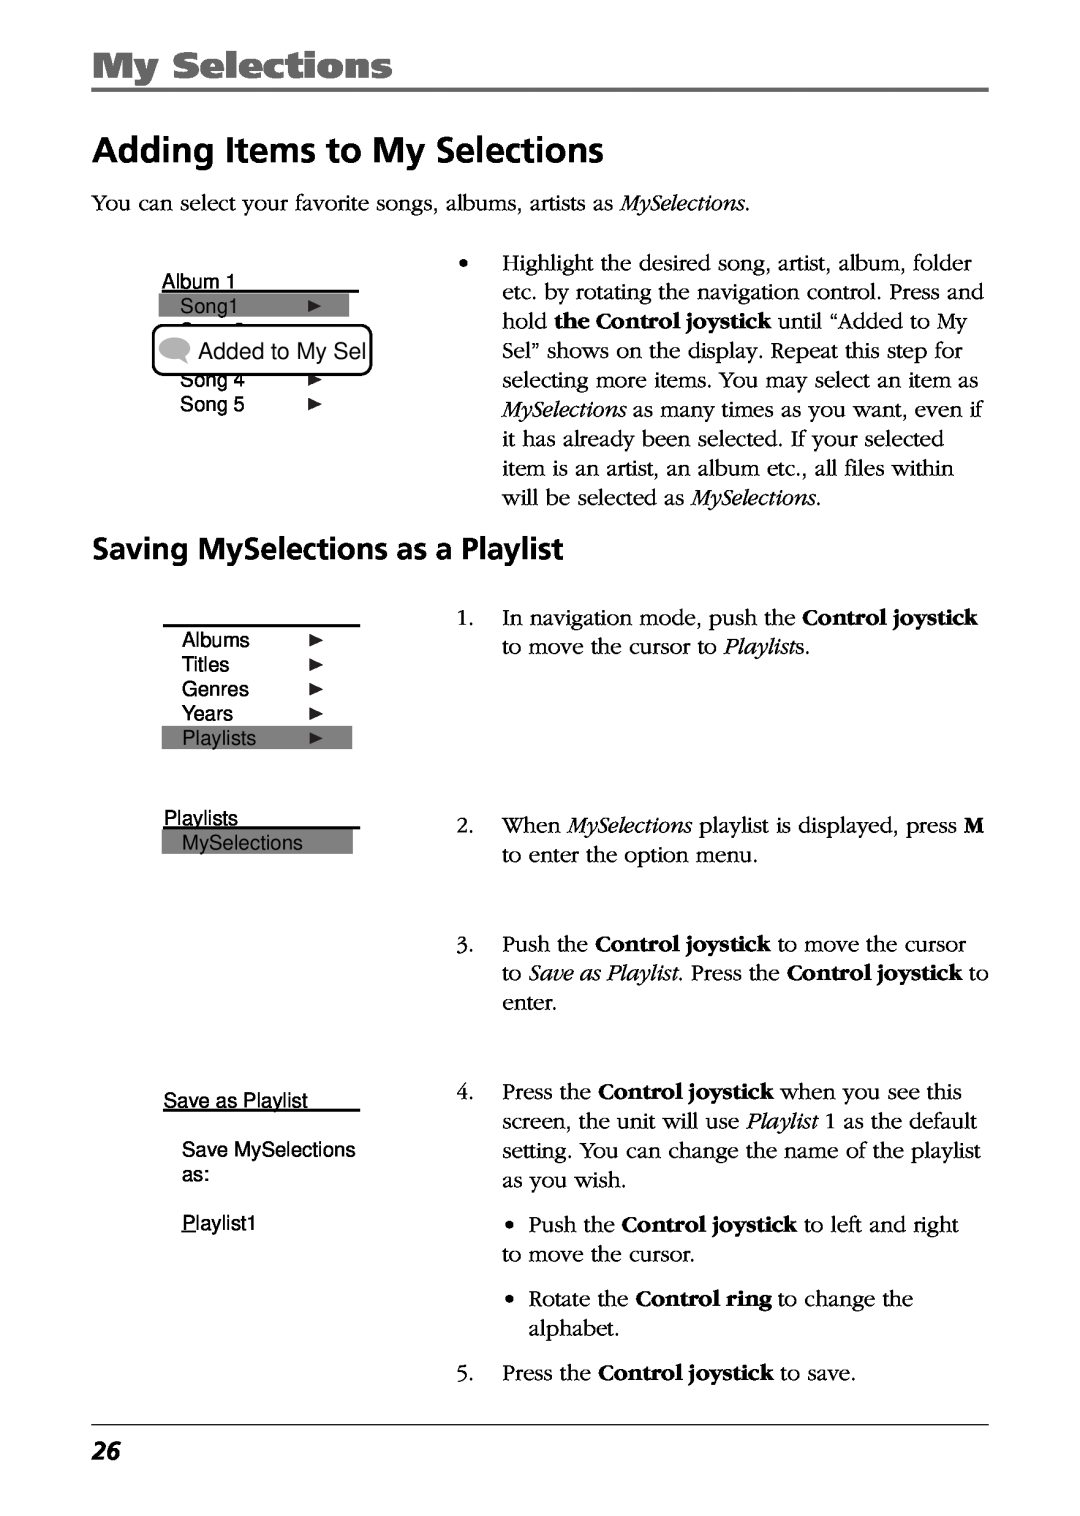 RCA H115/H125 manual Adding Items to My Selections, Saving MySelections as a Playlist 